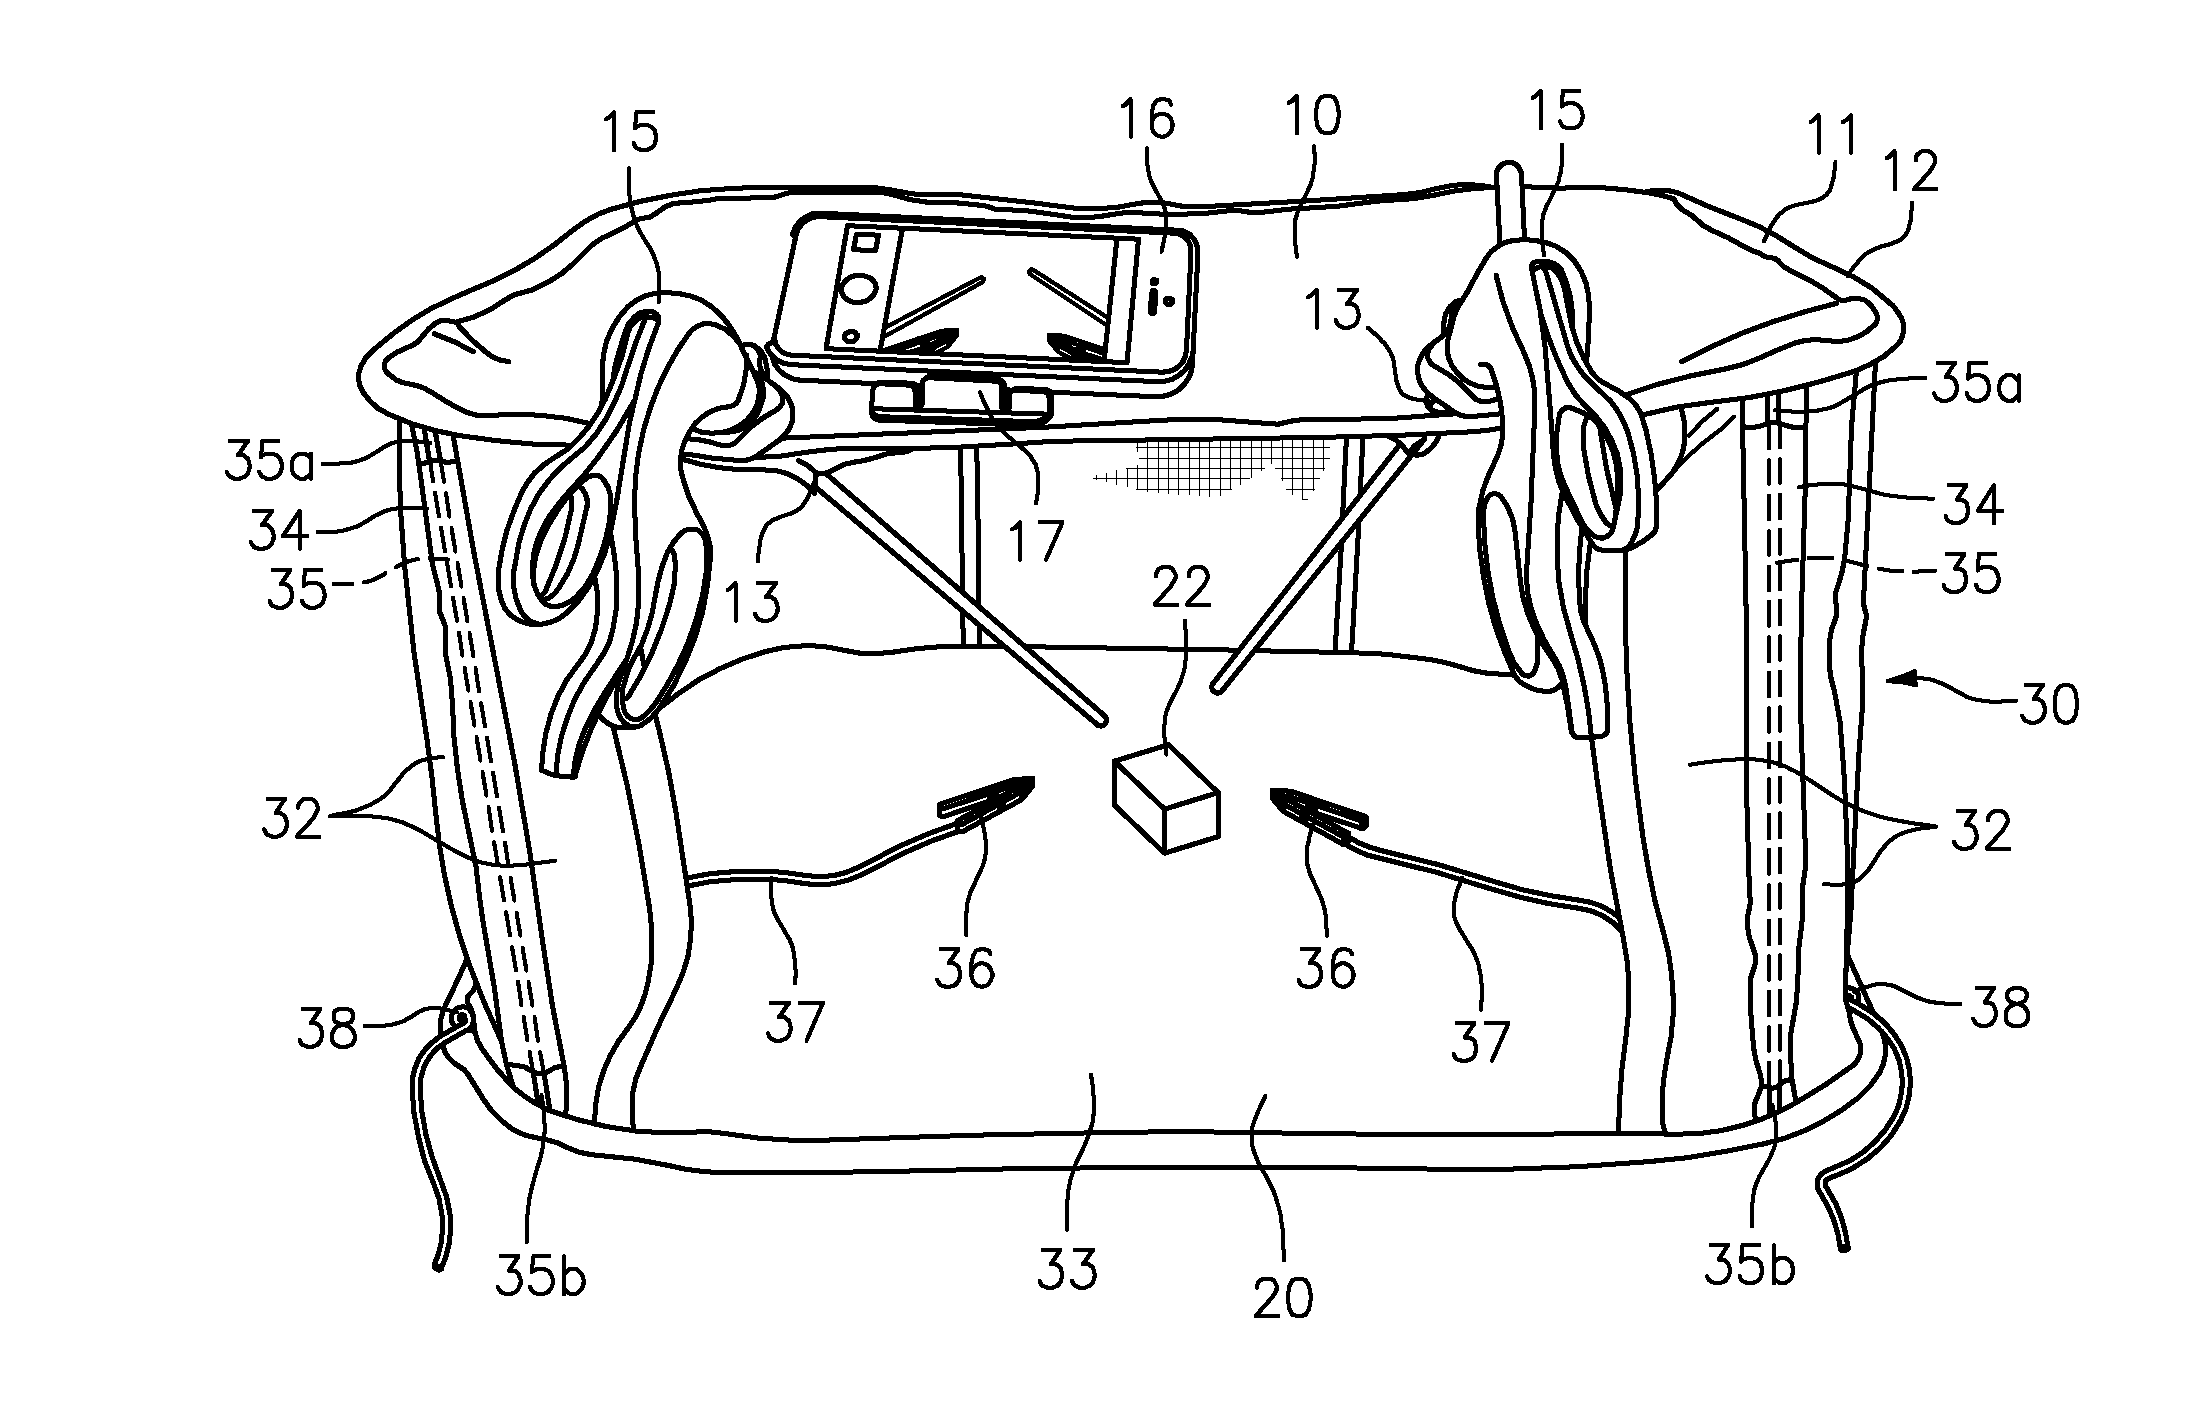 Collapsible Surgical Training Apparatus and Method for Laparoscopic Procedures